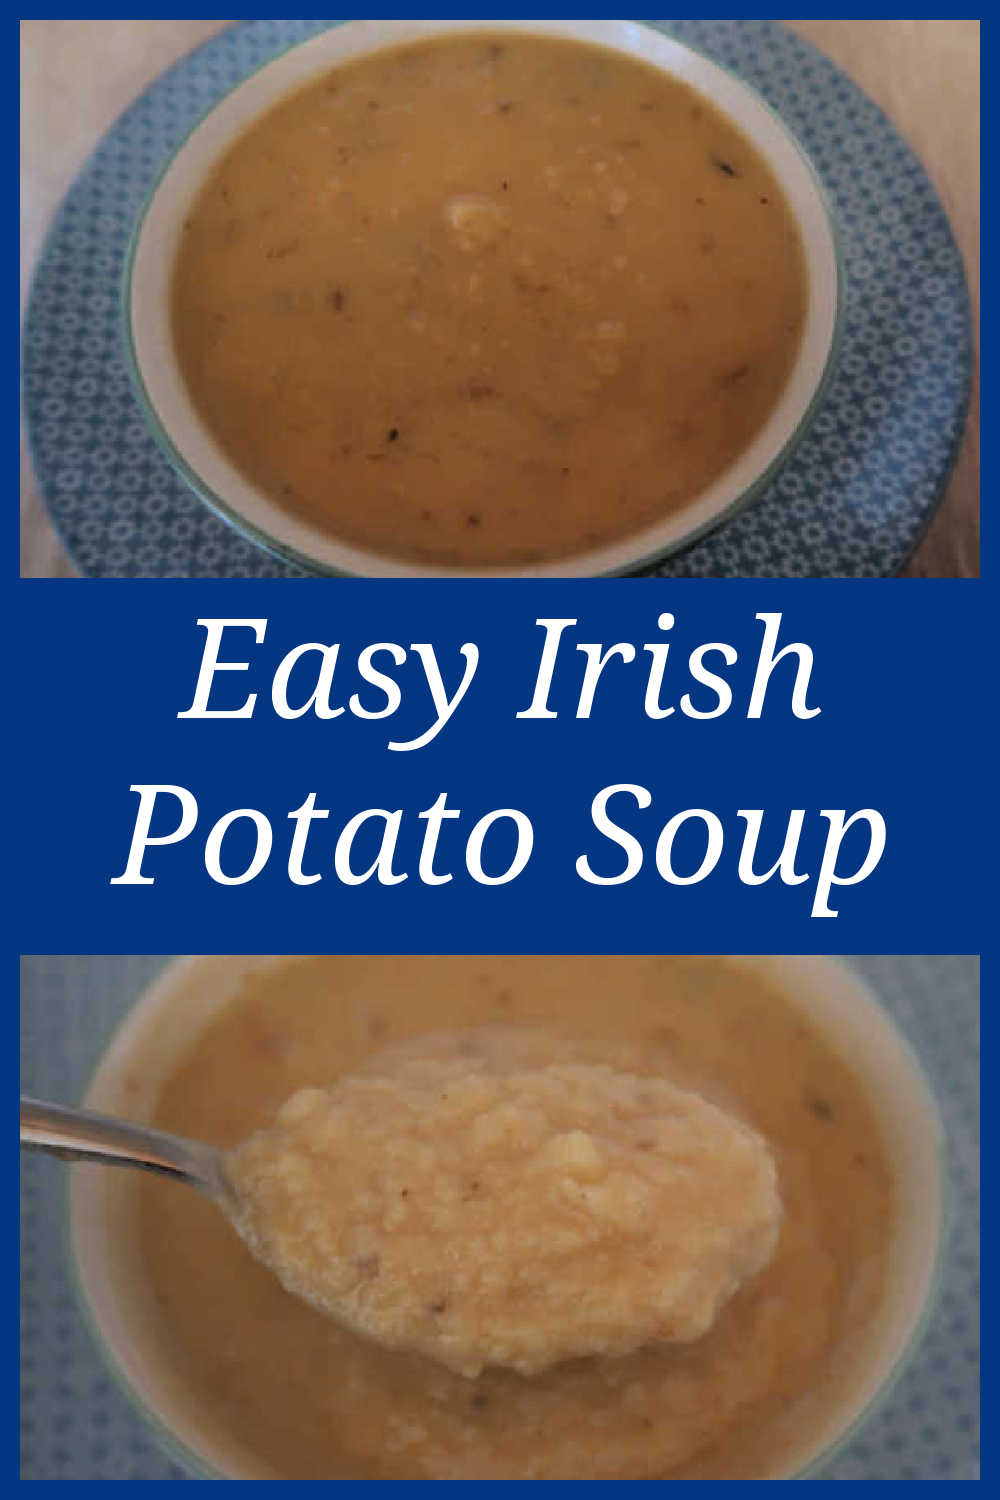 Irish Potato Soup Recipe - How to make an easy simple creamy or chunky traditional Irish comfort food dish - with the video tutorial.